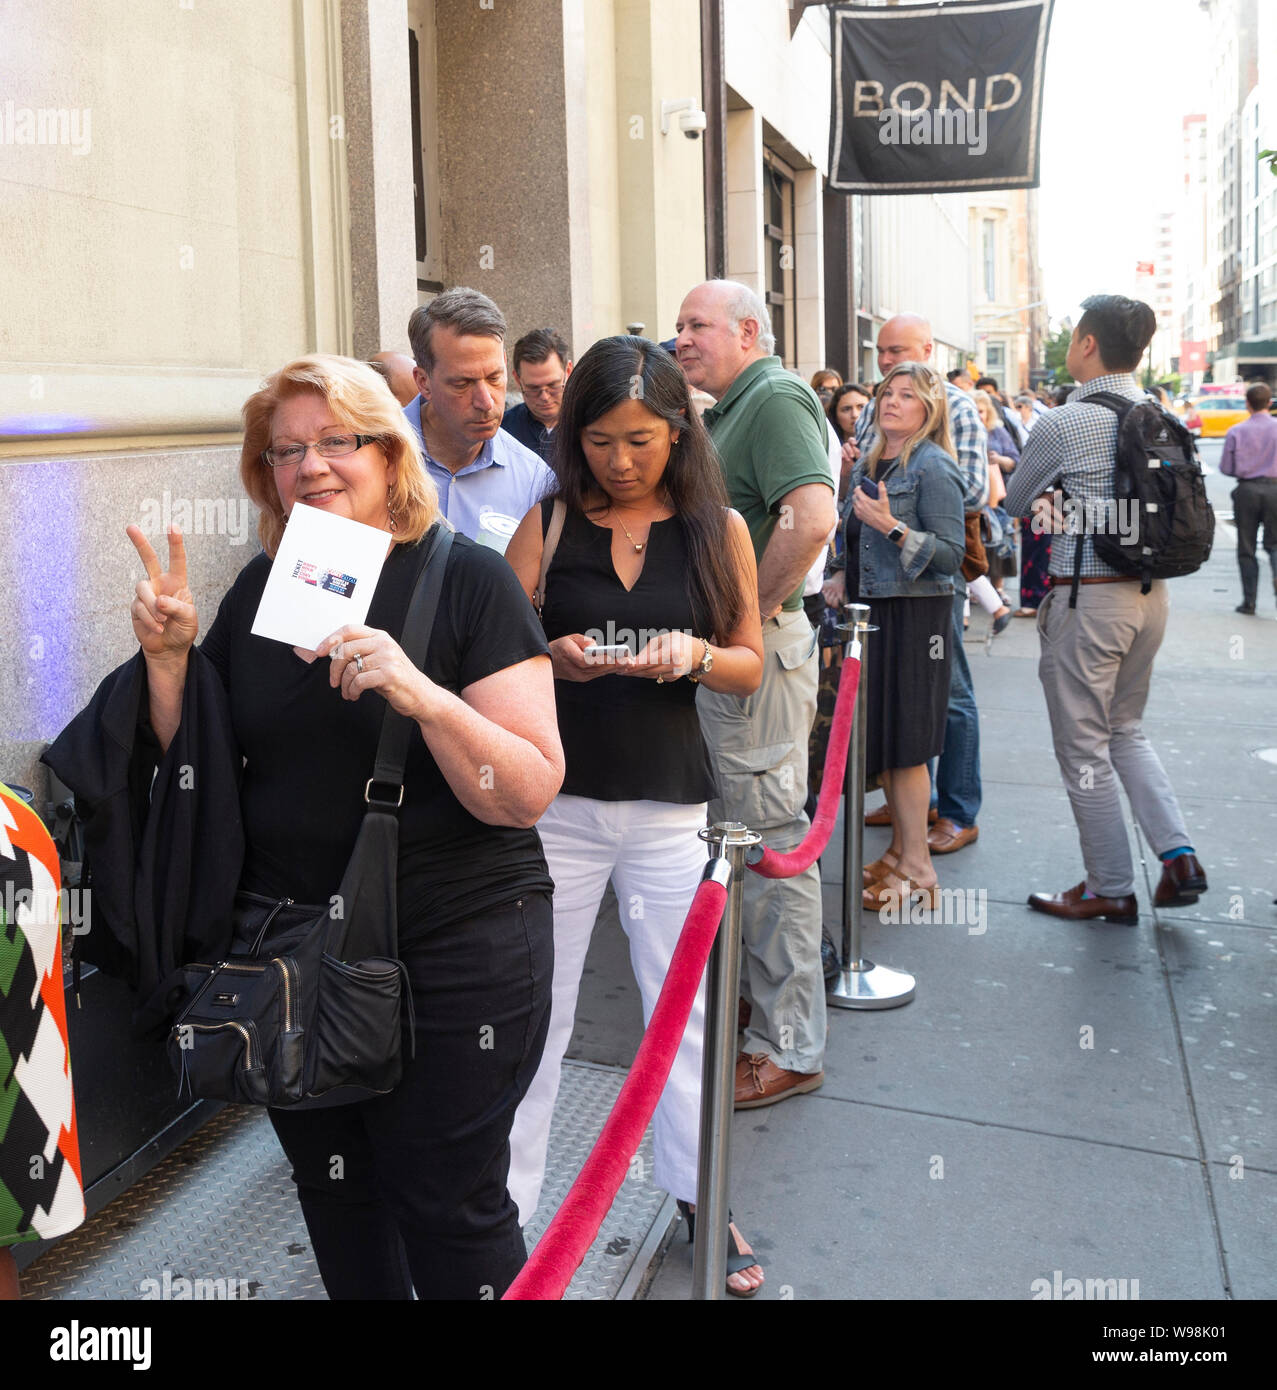 New York, NY - August 12, 2019: People lined up for Democratic presidential candidate US Senator Cory Booker campaign grassroots Happy Hour fundraiser event at the nightclub Slate Stock Photo